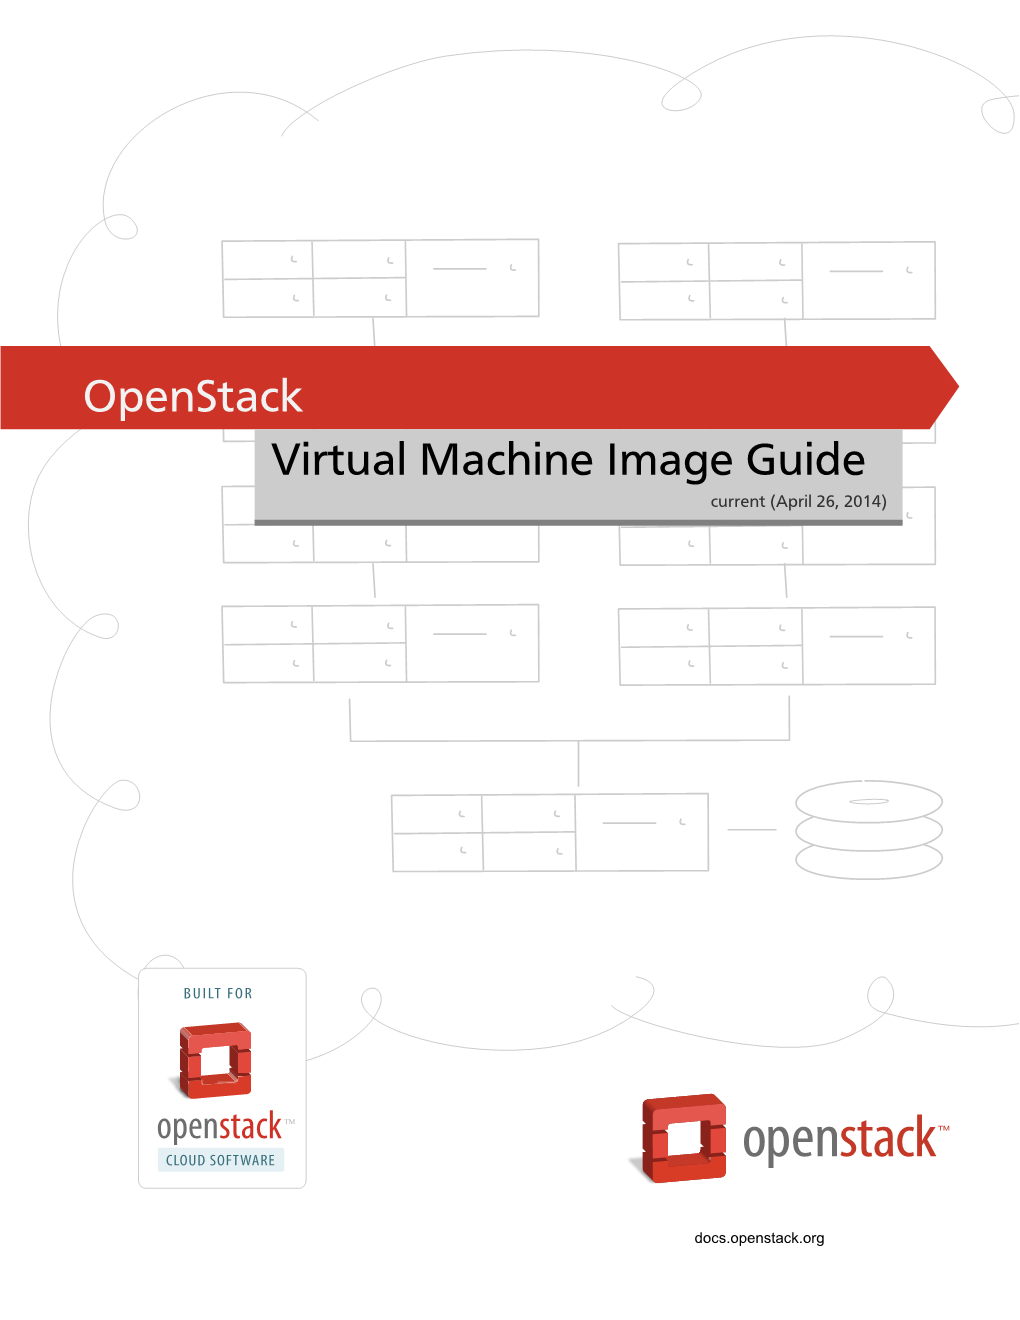 Openstack Virtual Machine Image Guide Current (2014-04-26) Copyright © 2013 Openstack Foundation Some Rights Reserved